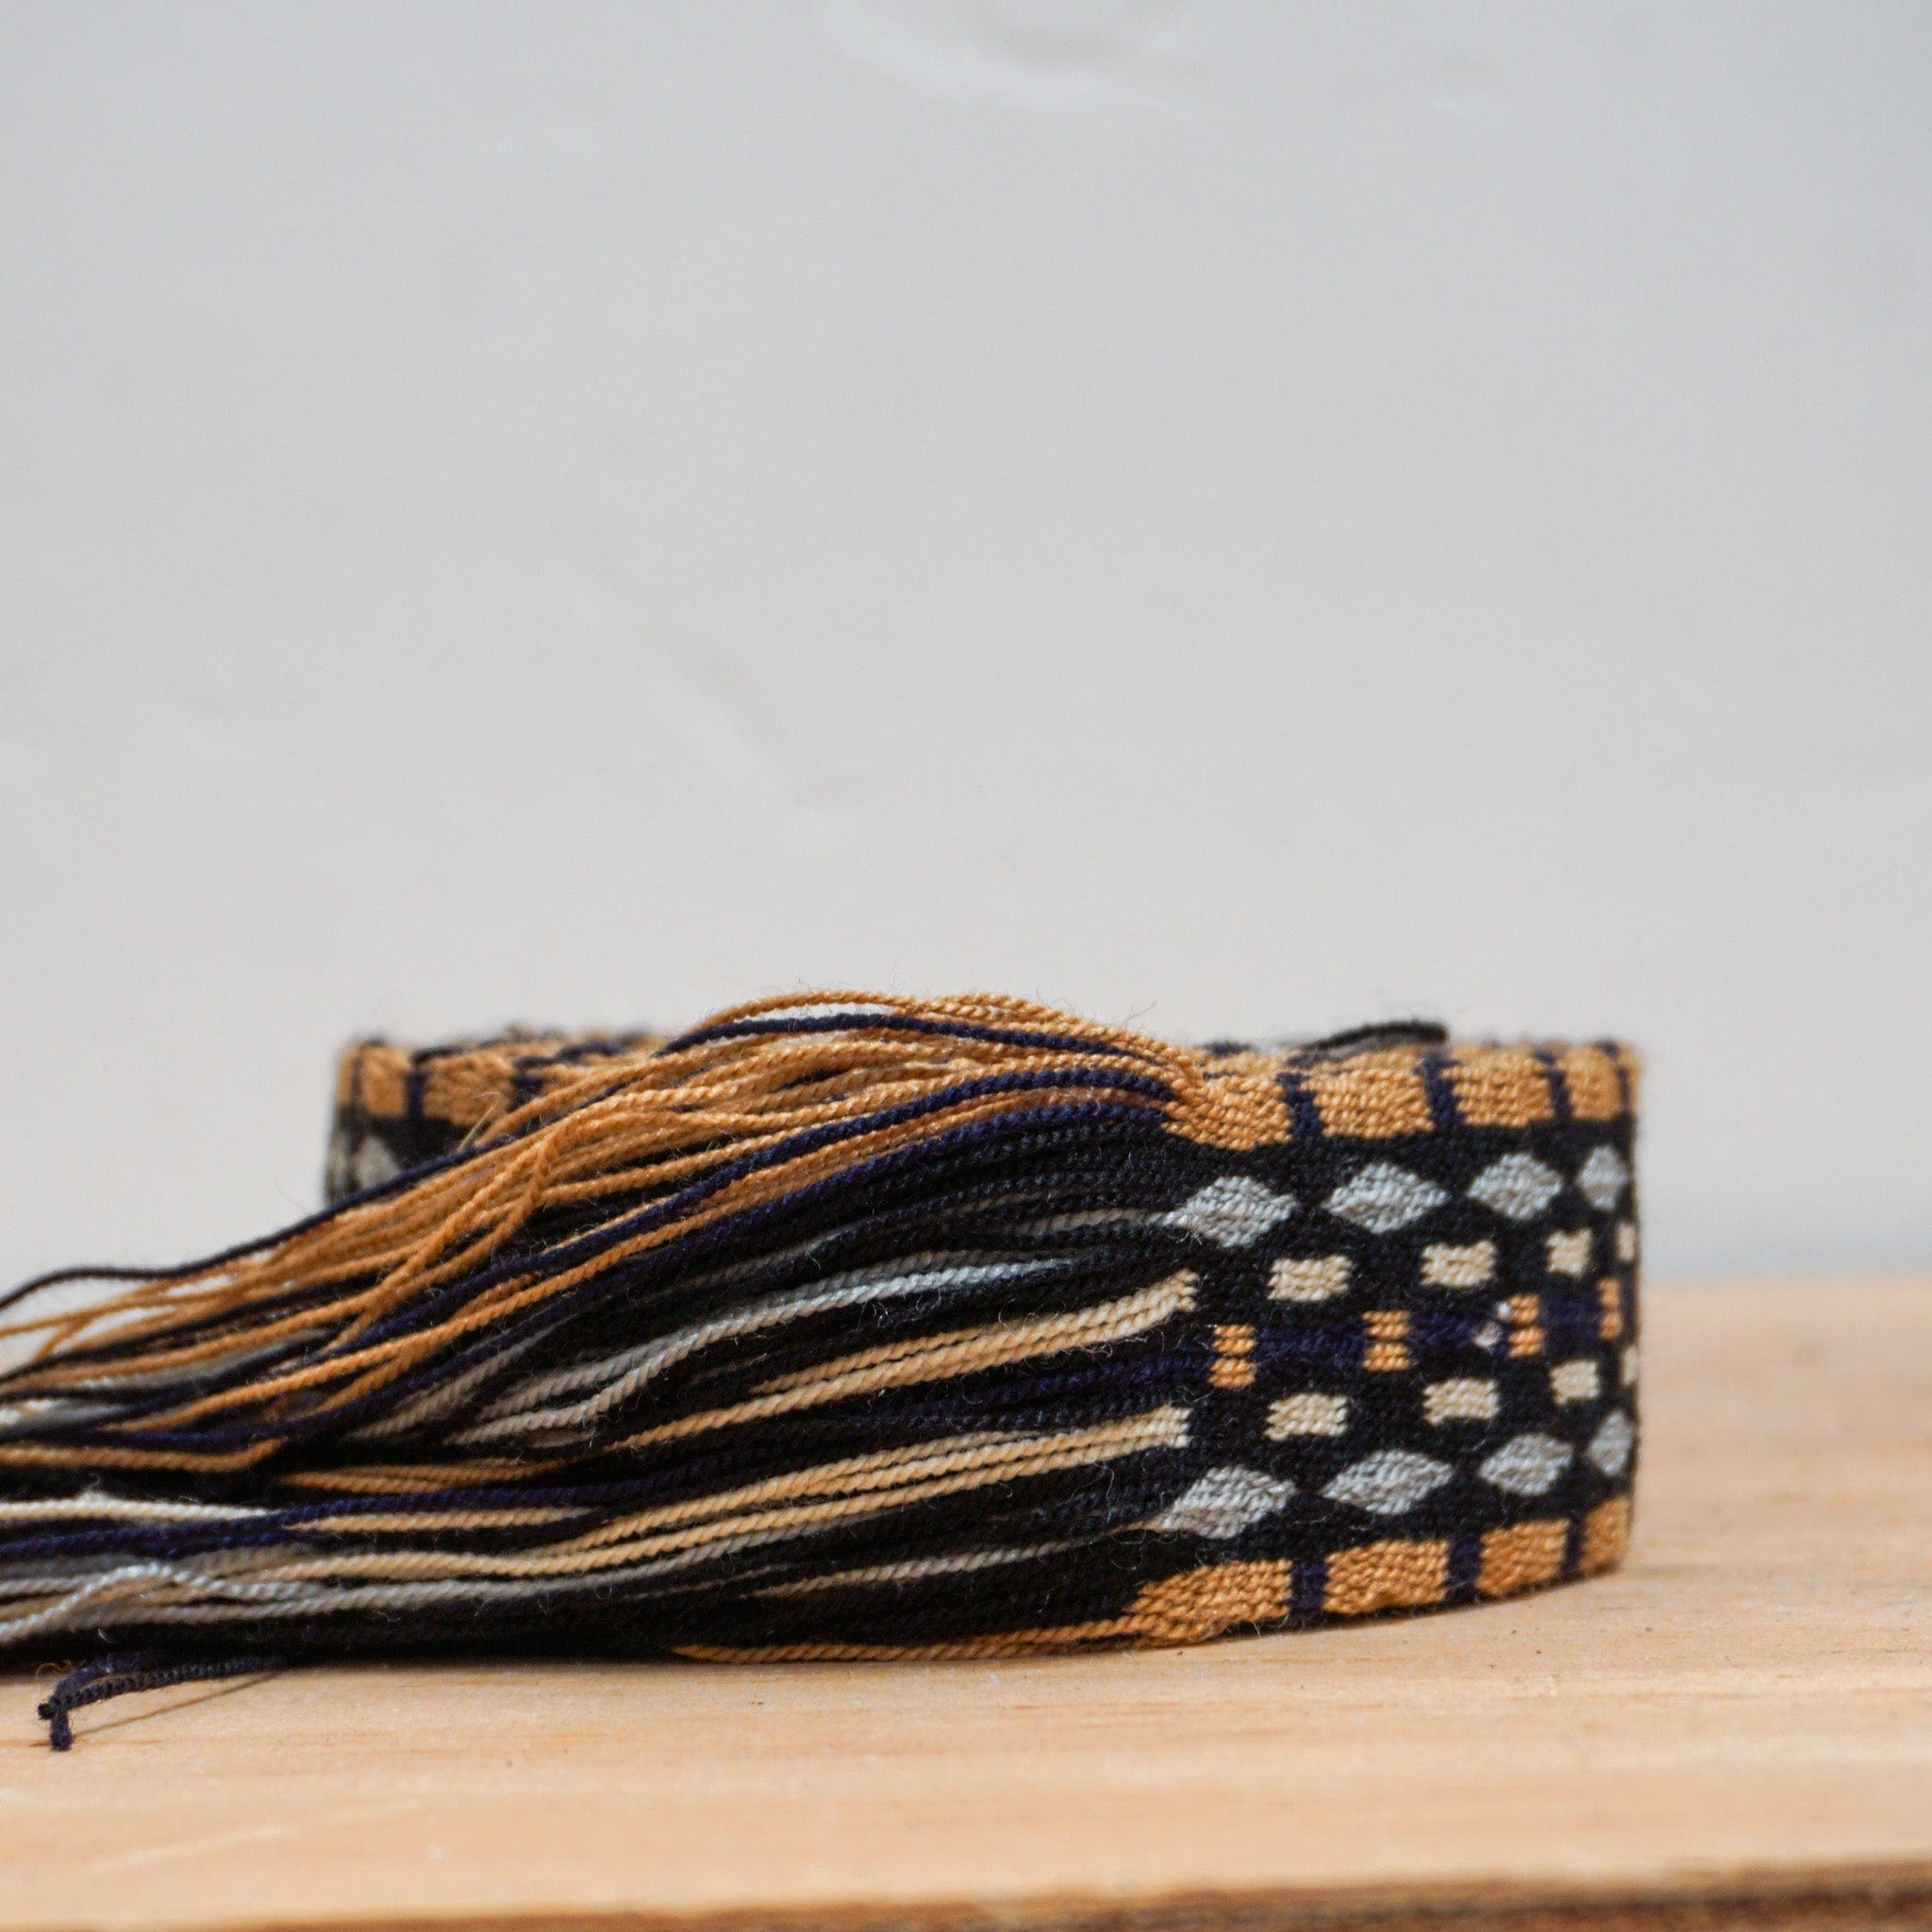 Guanabana Apparel & Accessories Black/Blue/Camel with Natural Fringes Braided Belt by Guanabana